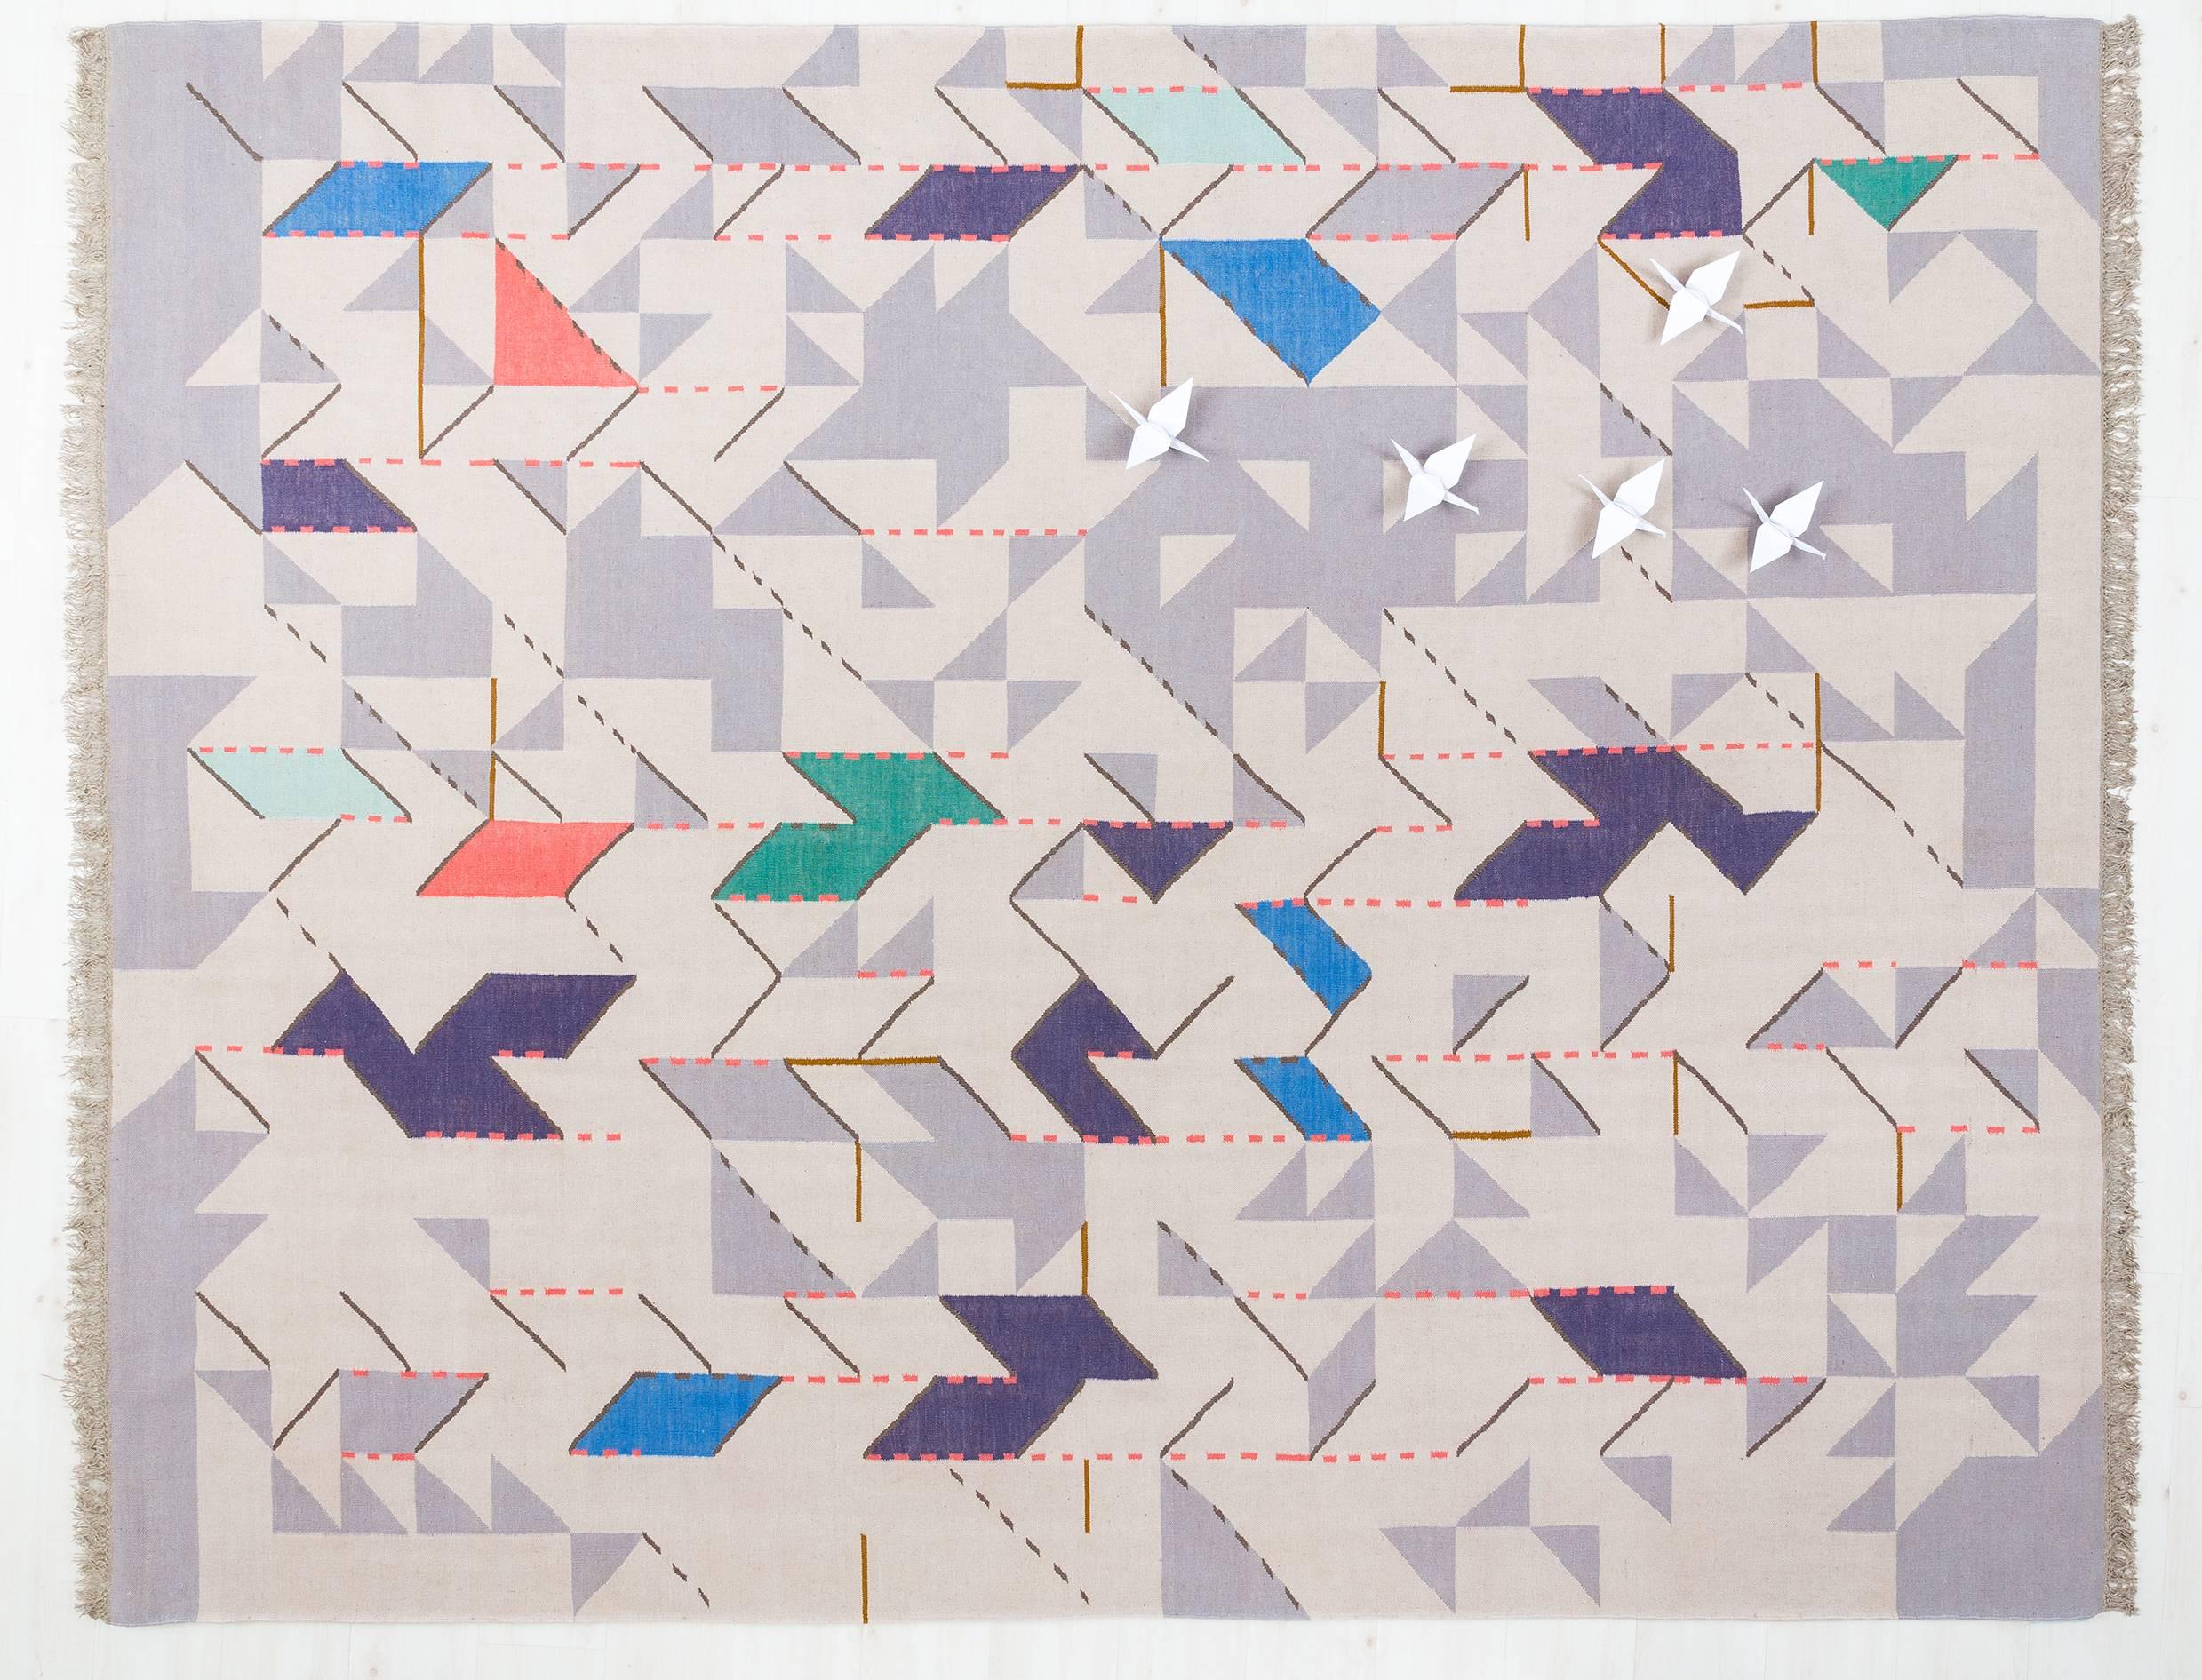 This is an open edition Kilim rug in the finest New Zealand wool, woven by Odabashian's network of family-owned weavers near Mirzapur, India. The design was created by Miami based artist, Johanna Boccardo for Zona Maco Contemporary Art Fair,